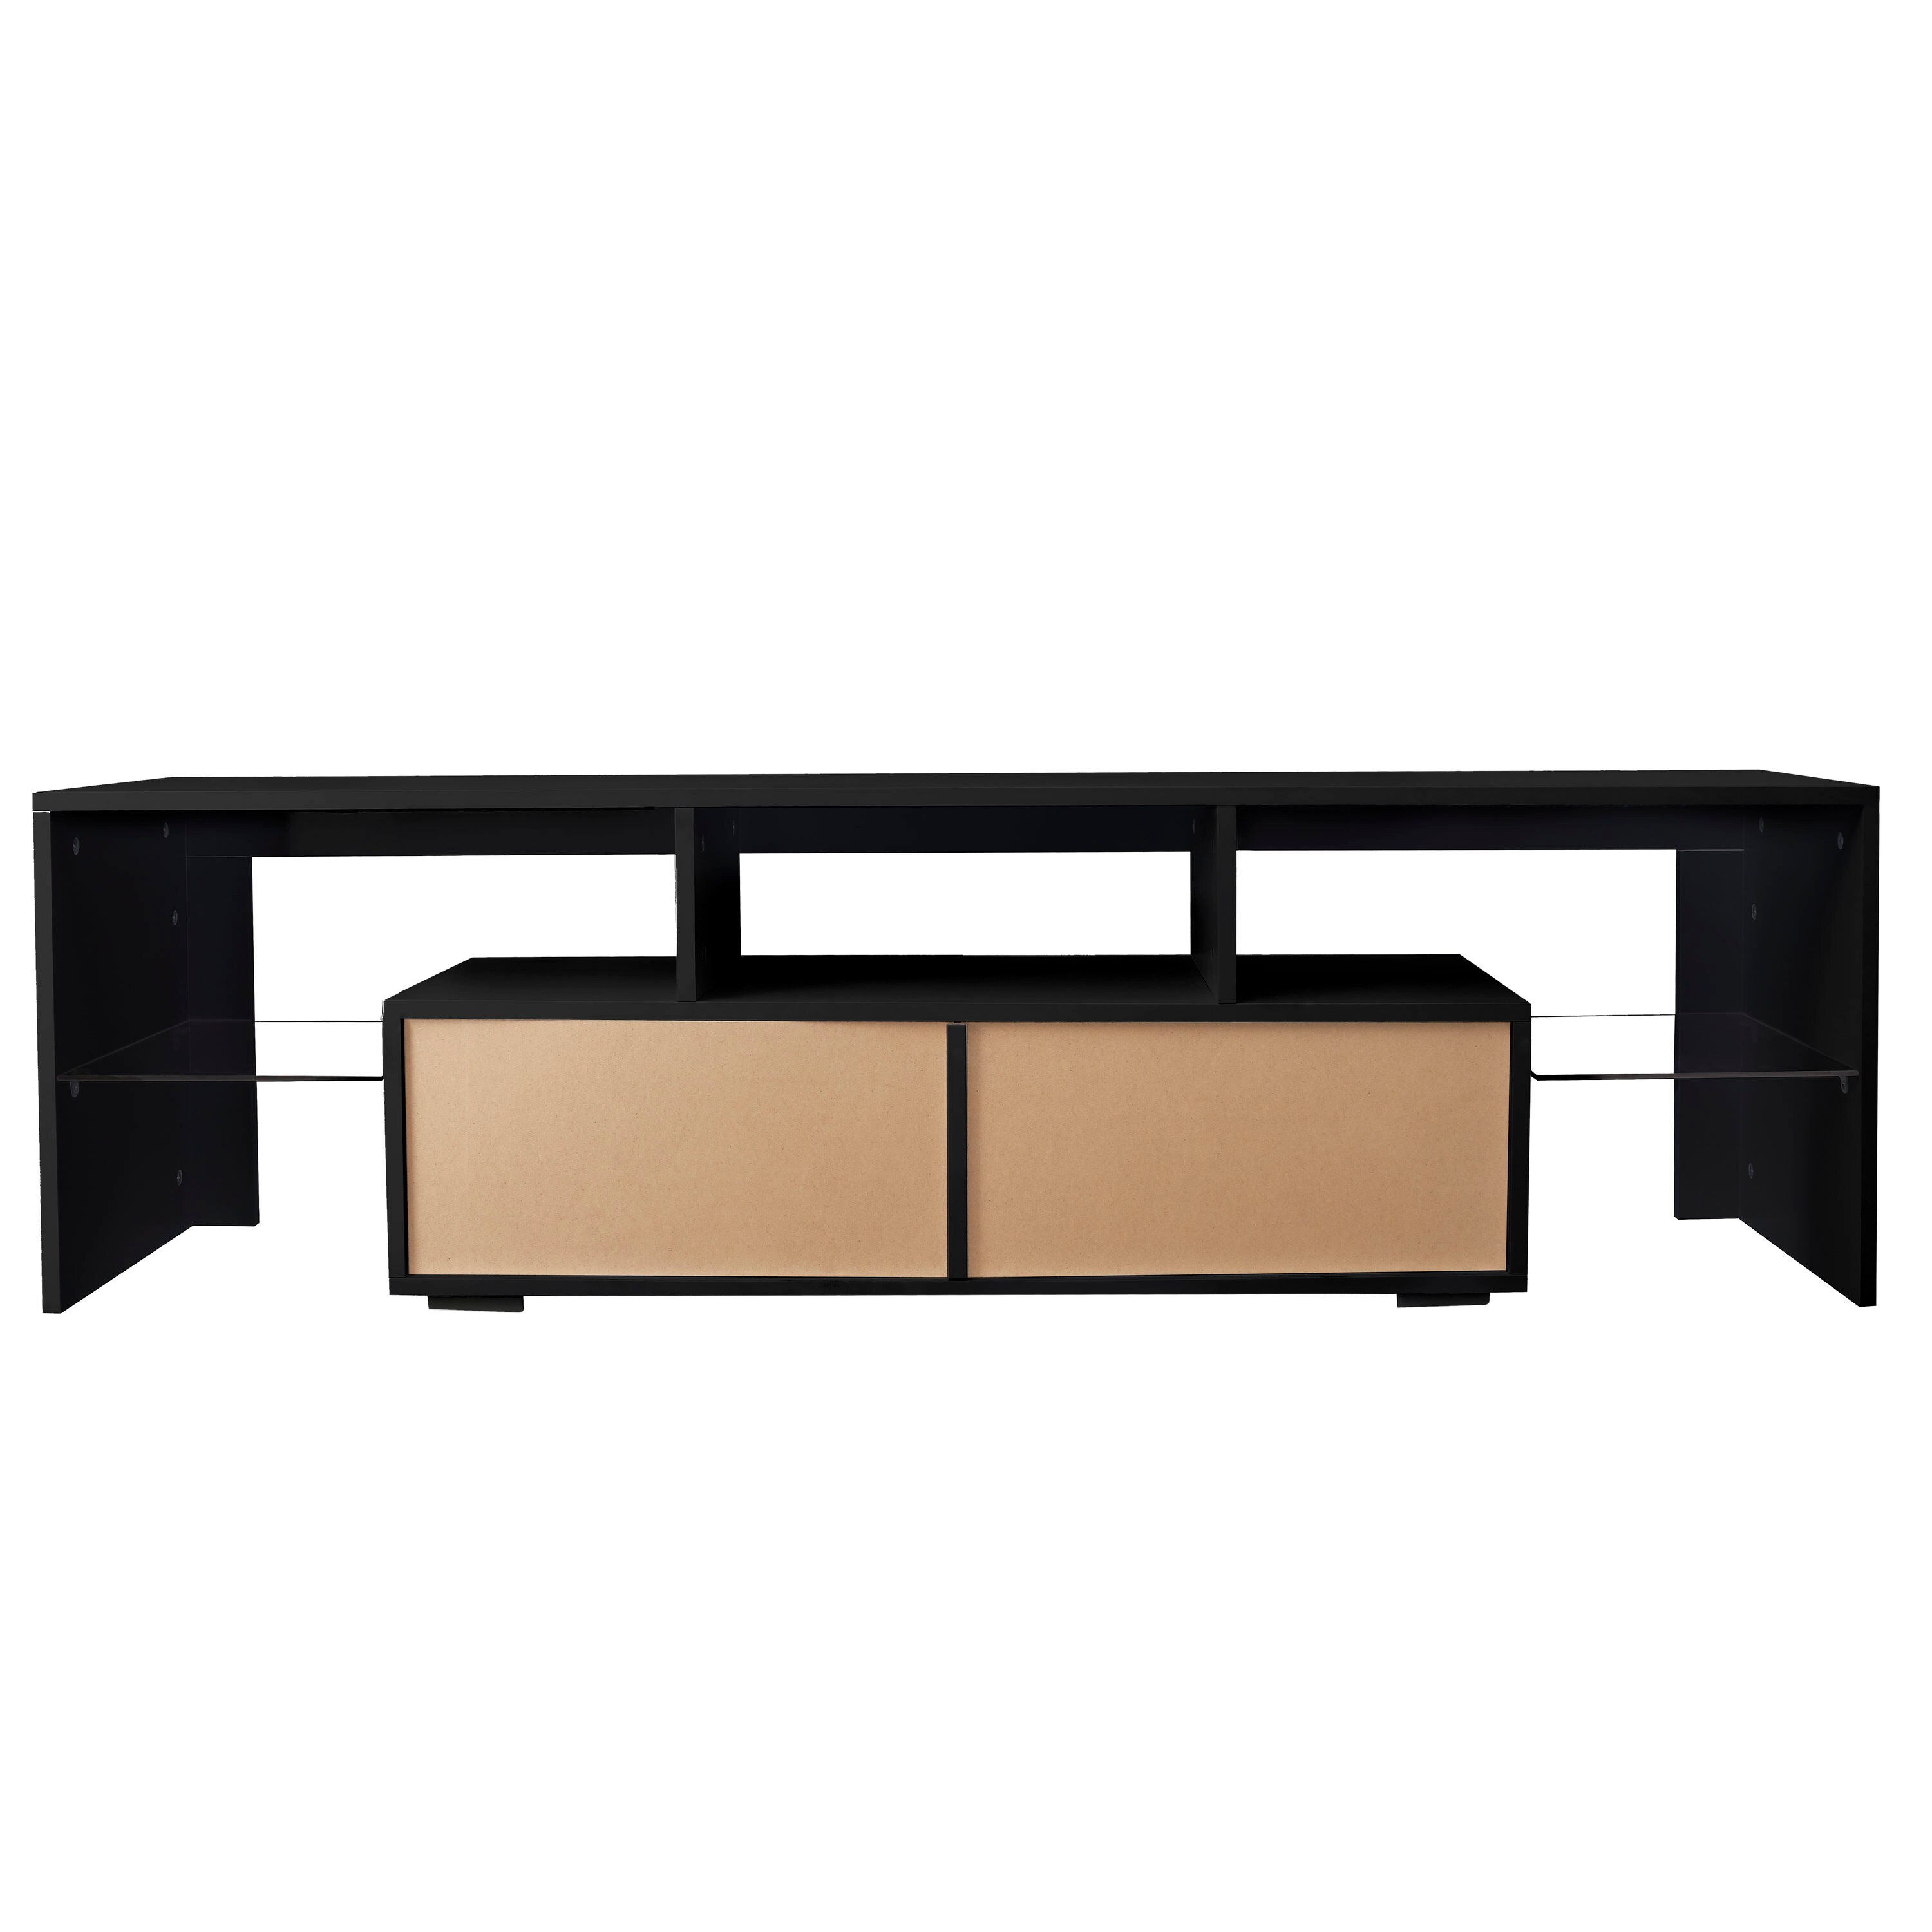 GZMR Black TV Stand for 70-in TV Stands Modern/Contemporary Black TV  Cabinet (Accommodates TVs up to 70-in)